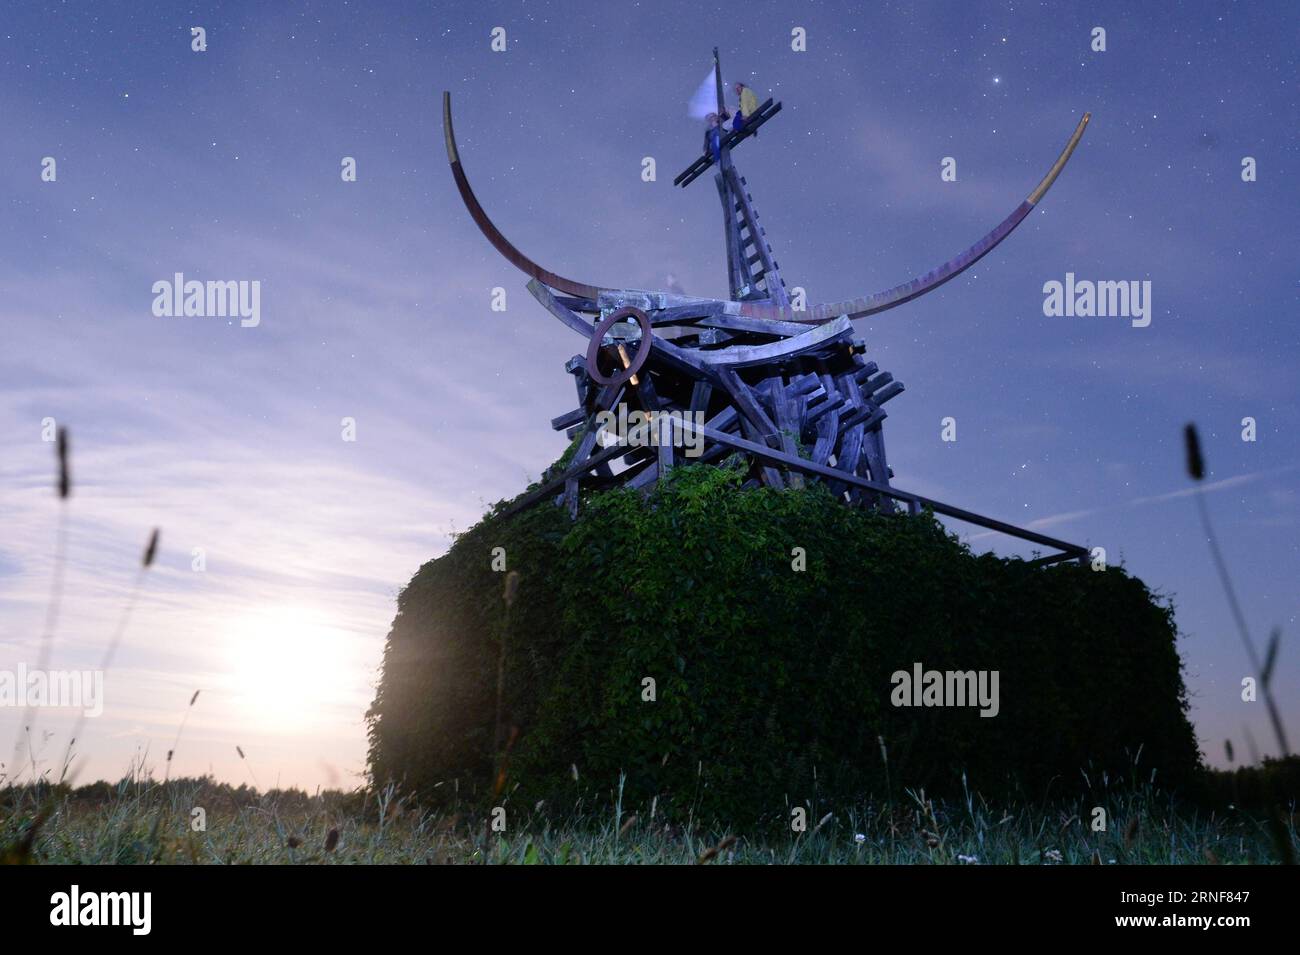 NIKOLA-LENIVETS, July 23, 2016 -- Art work Gilded Calf is displayed during a landscape architecture festival called Archstoyanie in Nikola-Lenivets, Russia, July 23, 2016. The annual event held in Nikola-Lenivets outside Moscow presents brand-new ideas that could redefine visitors view of architecture. )(zcc) RUSSIA-NIKOLA-LENIVETS-ARCHSTOYANIE FESTIVAL PavelxBednyakov PUBLICATIONxNOTxINxCHN   Nikola Lenivets July 23 2016 Art Work Gilded Calf IS displayed during a Landscape Architecture Festival called Archstoyanie in Nikola Lenivets Russia July 23 2016 The Annual Event Hero in Nikola Lenivets Stock Photo